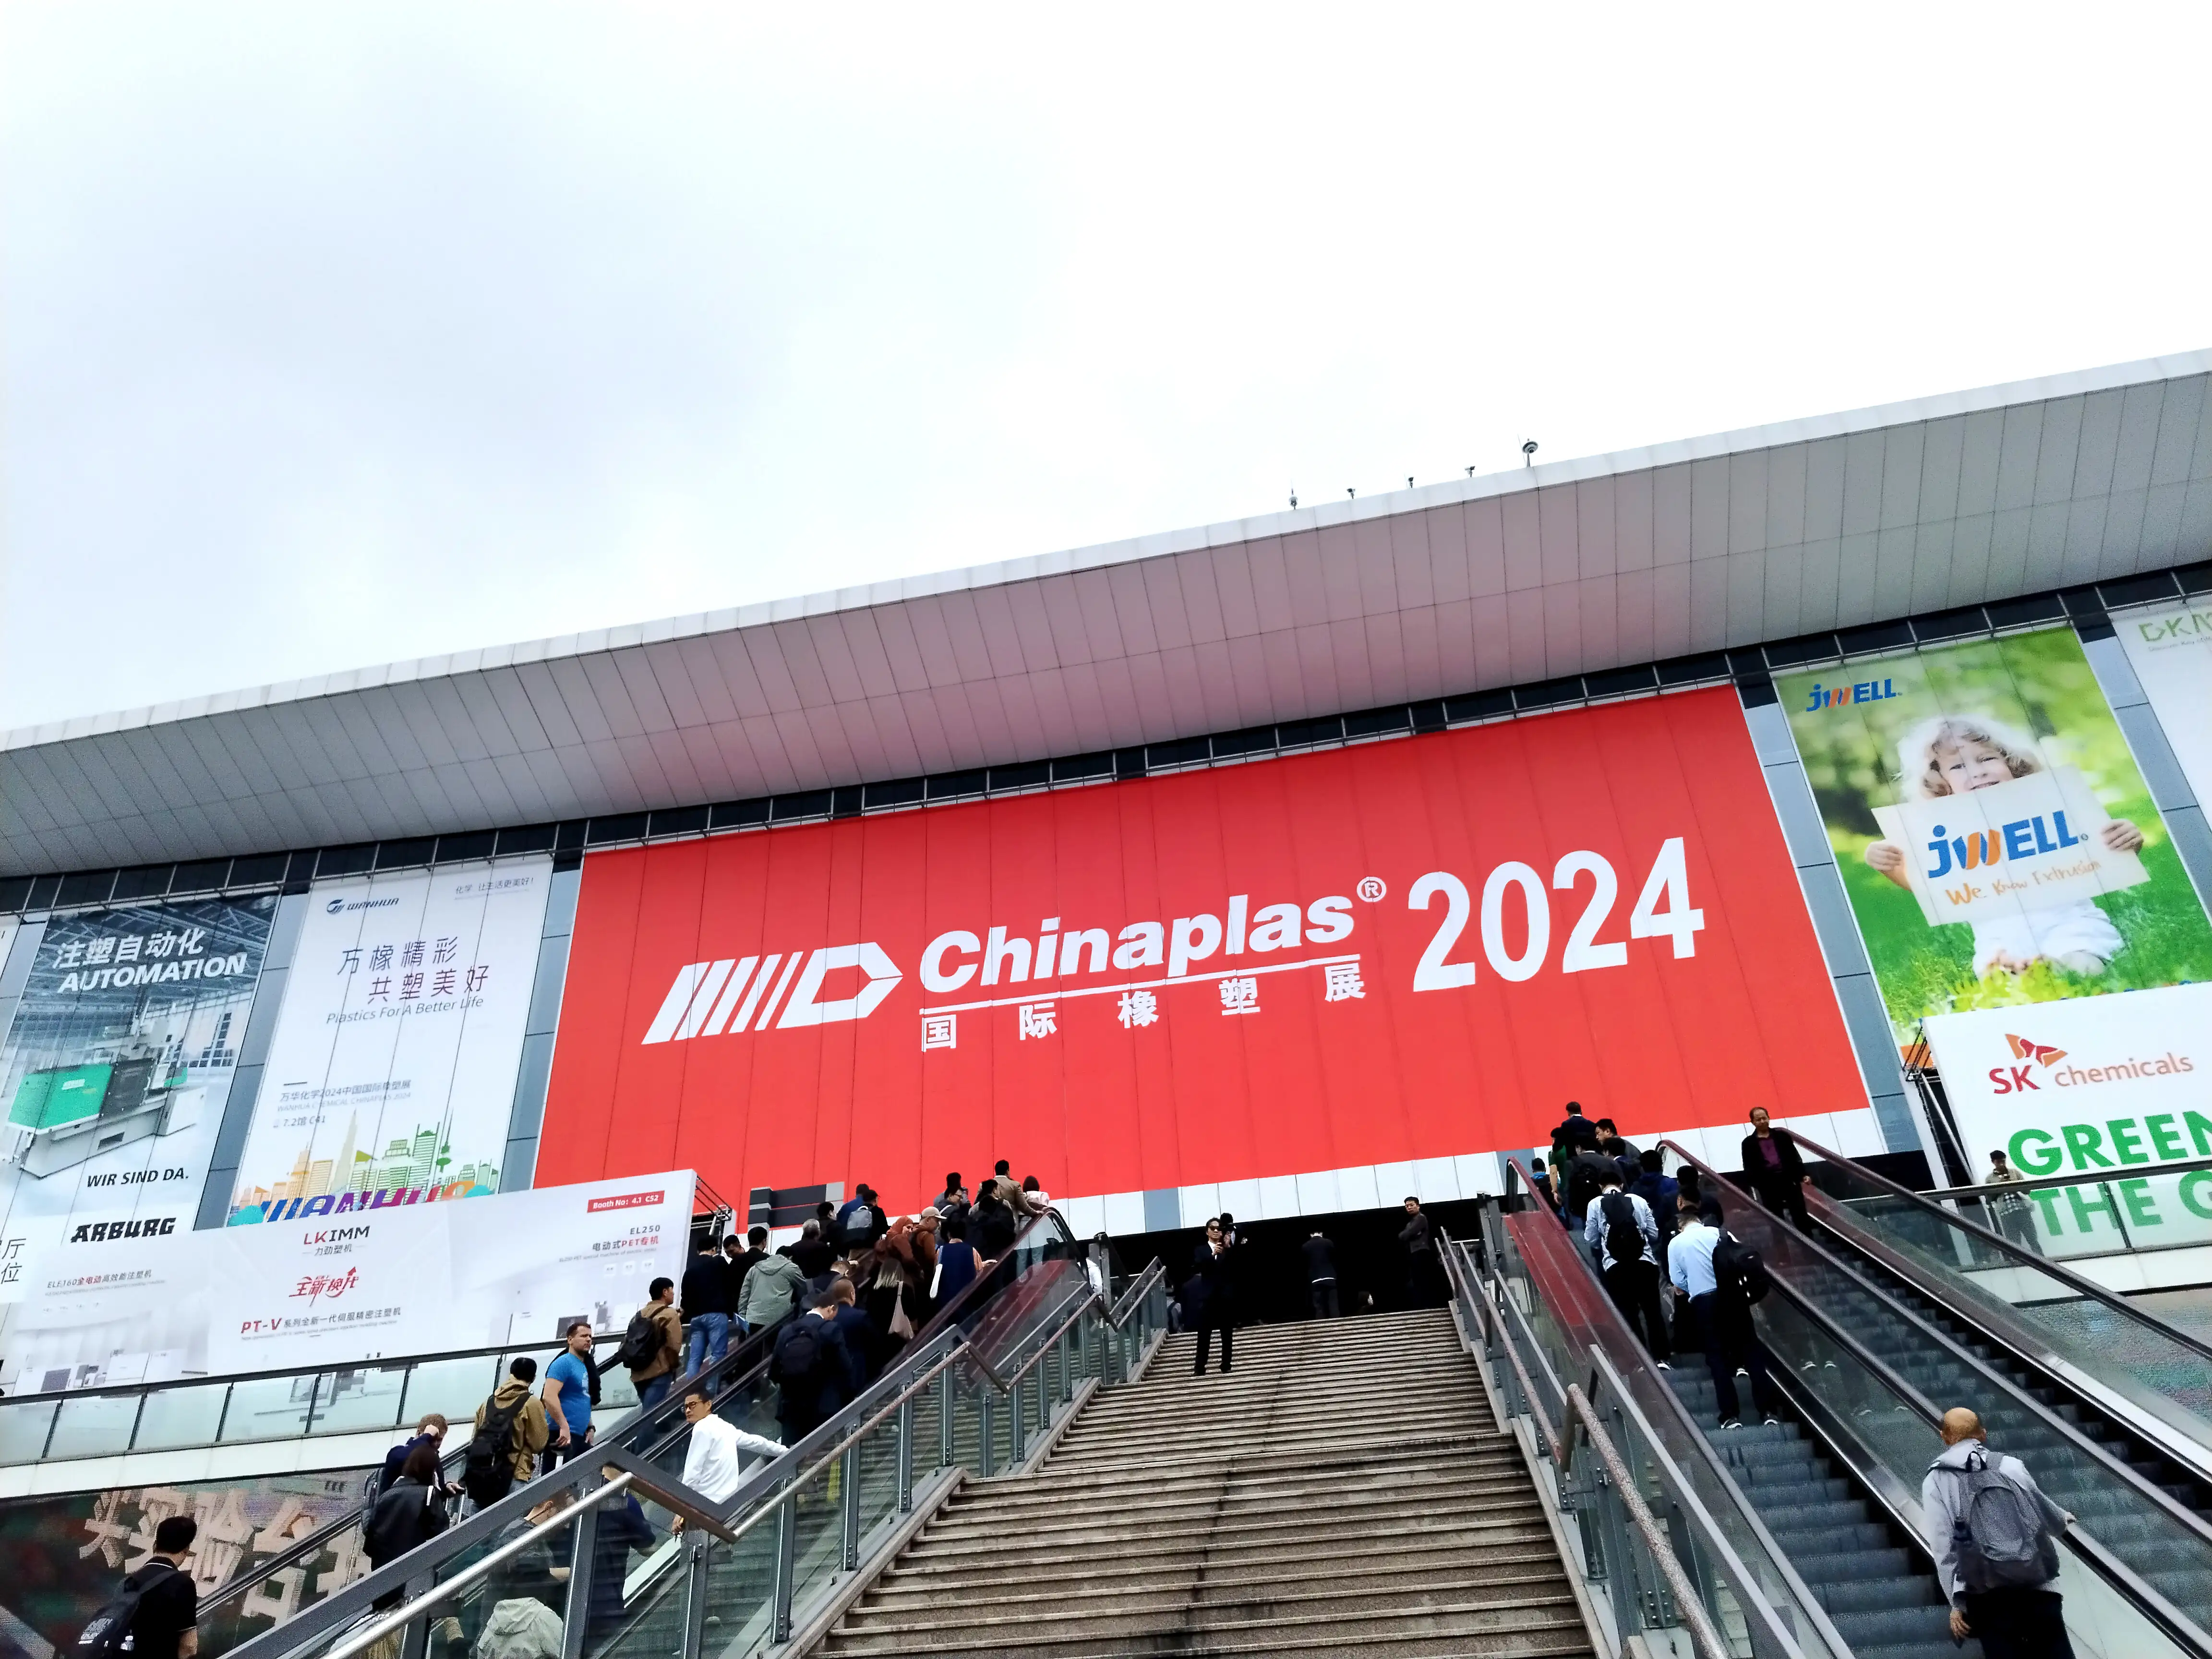 April 23 to 26, the "International Rubber & Plastics Exhibition" at Shanghai National Exhibition Center returns after 6 years.